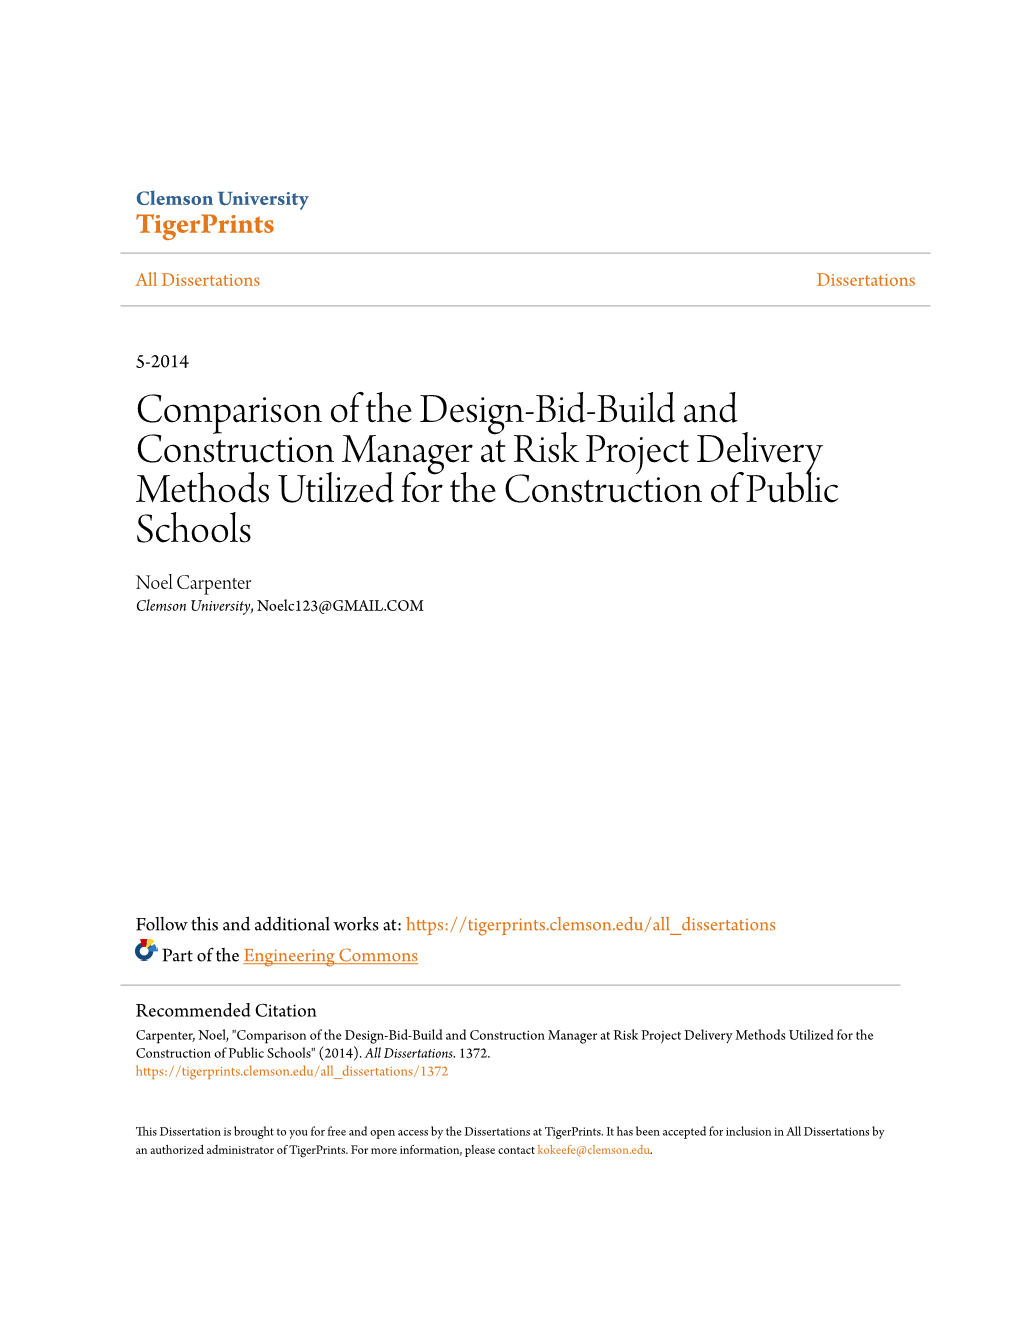 Comparison of the Design-Bid-Build and Construction Manager at Risk